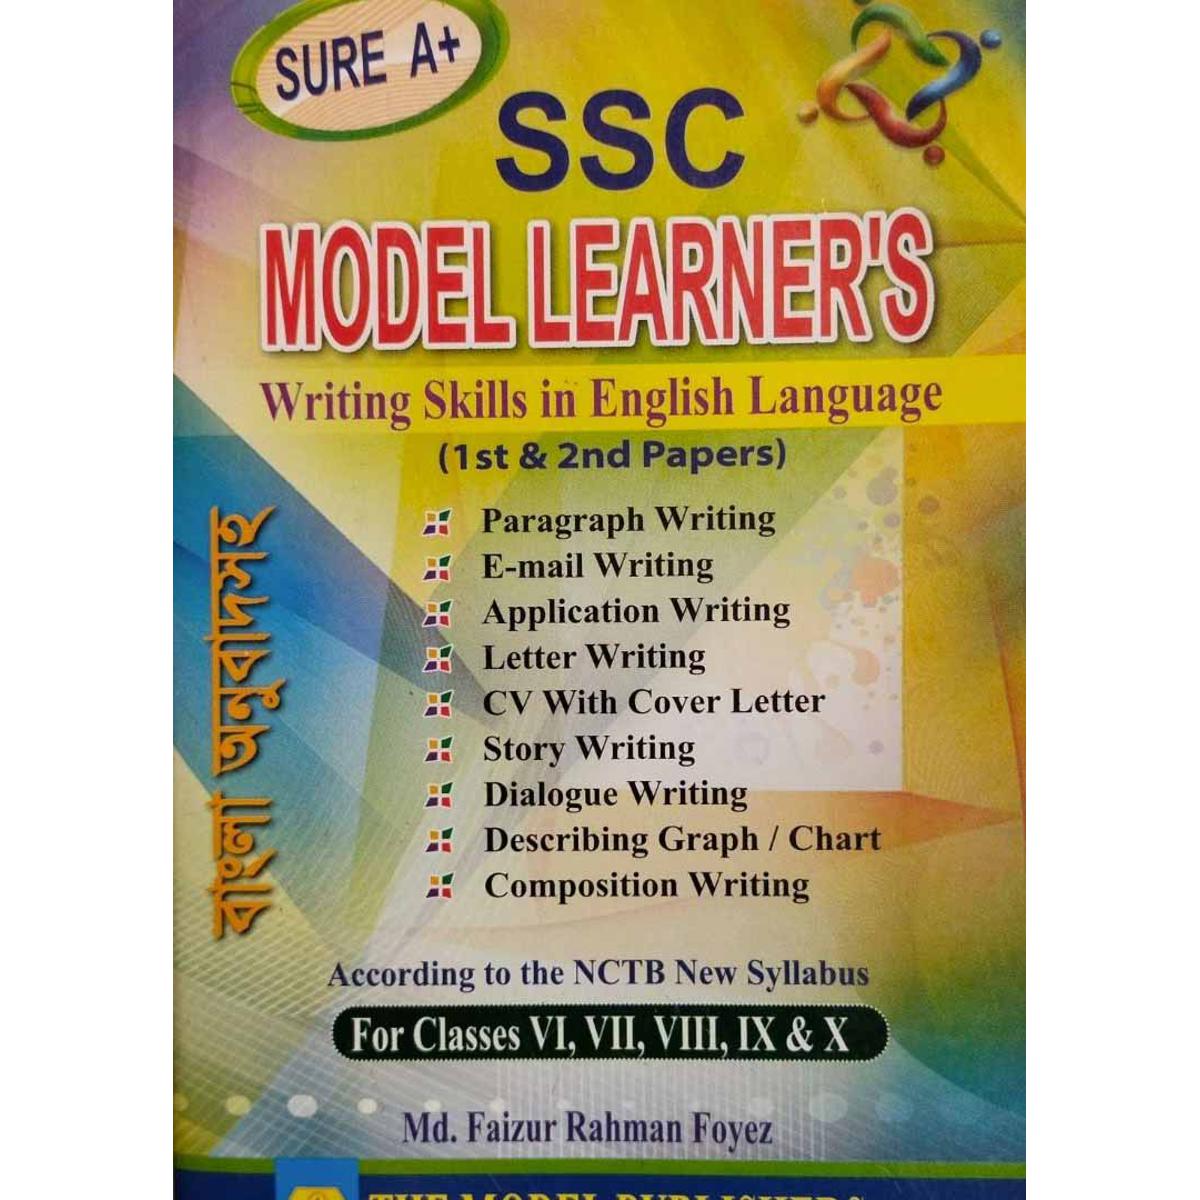 SSC Model Learner's Writing Skills in English Language